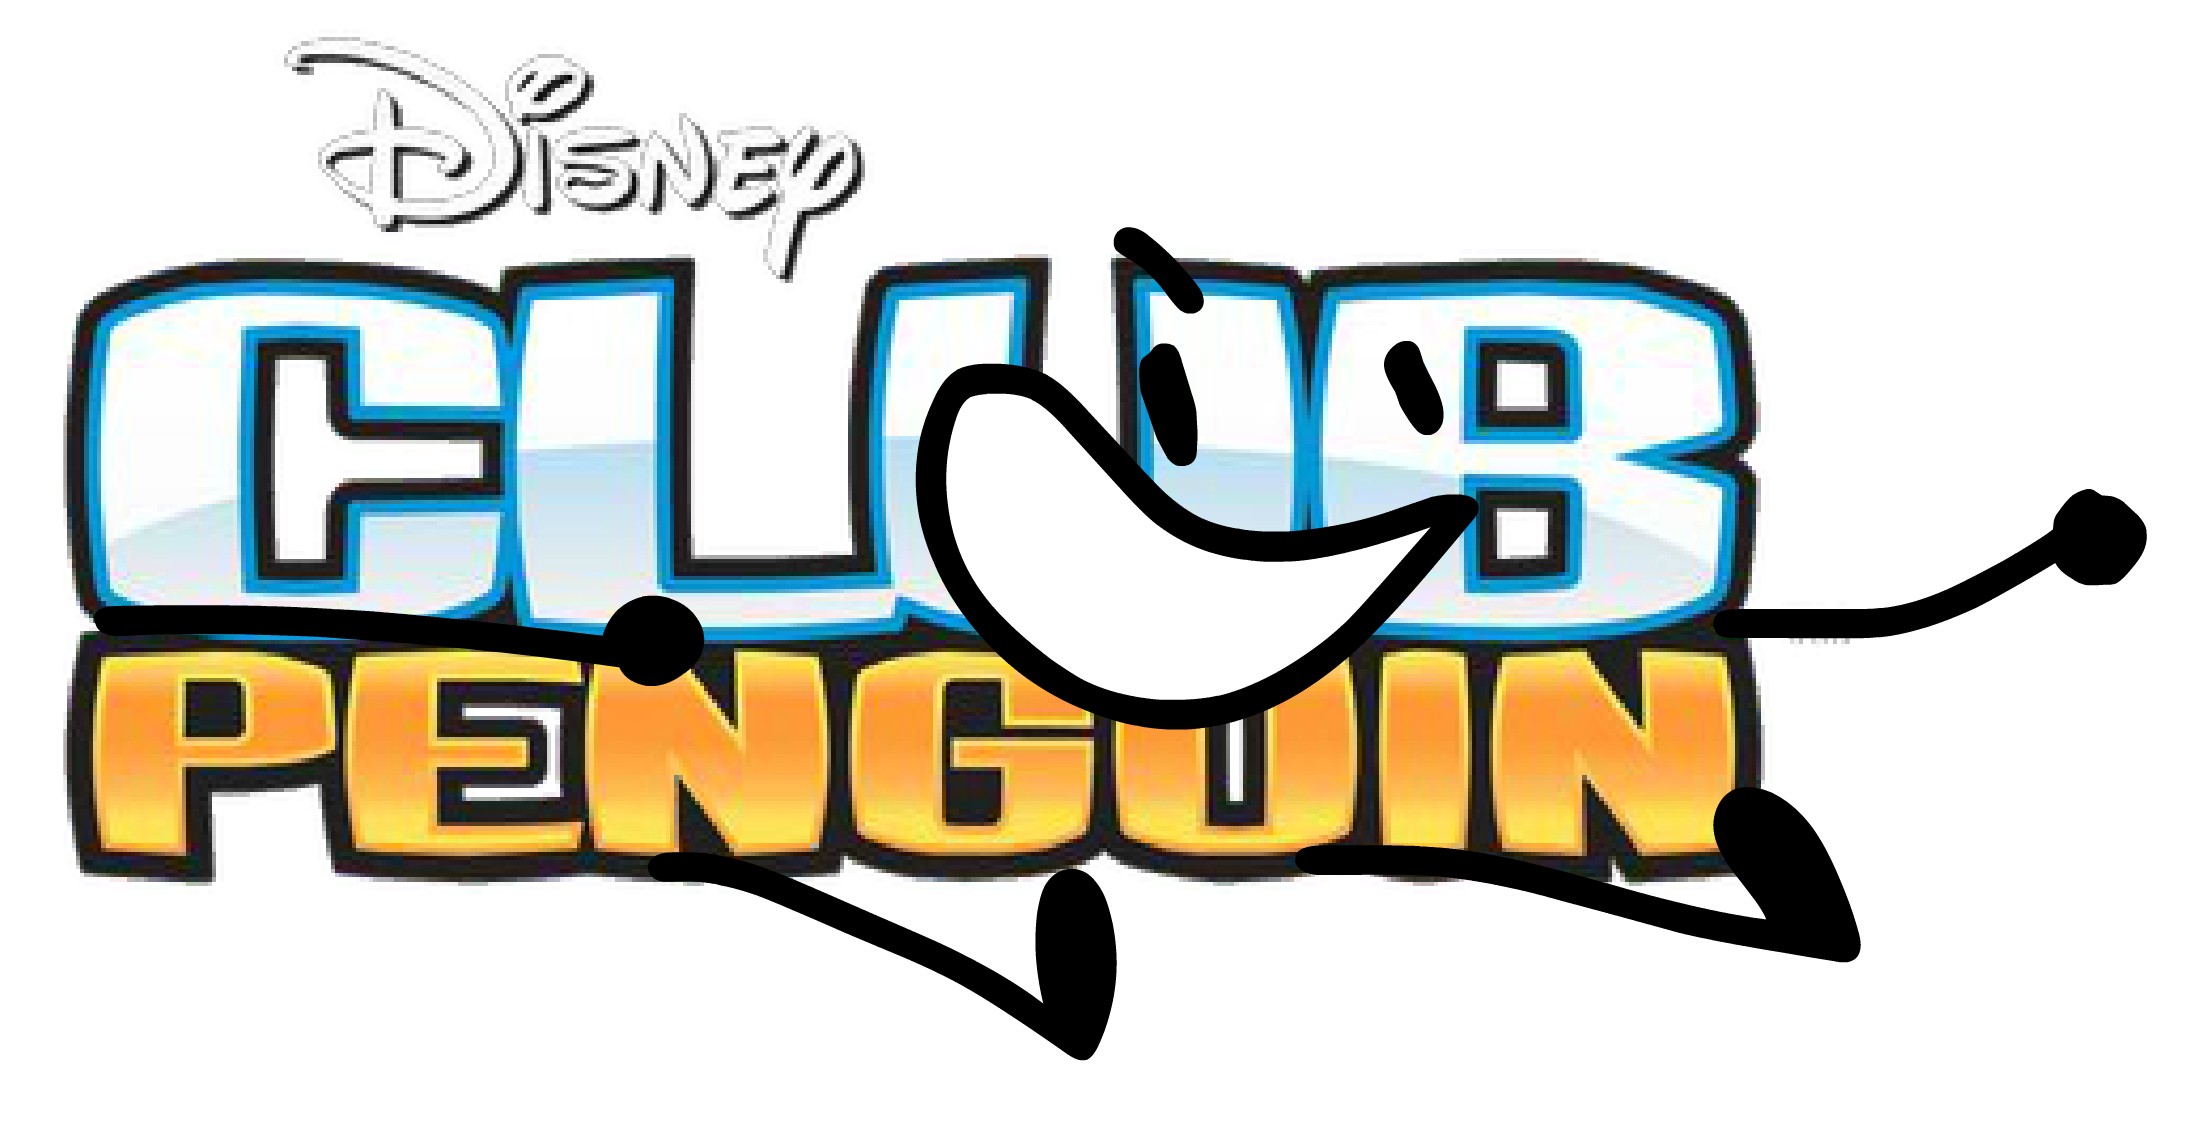 unregistered hypercam 2 free download for club penguin